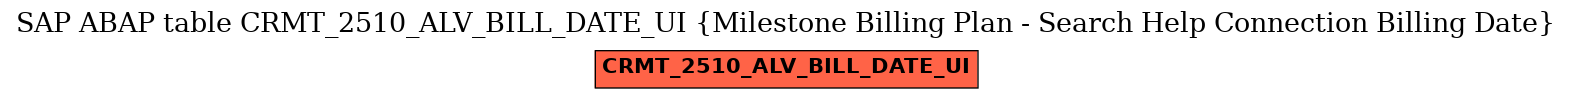 E-R Diagram for table CRMT_2510_ALV_BILL_DATE_UI (Milestone Billing Plan - Search Help Connection Billing Date)